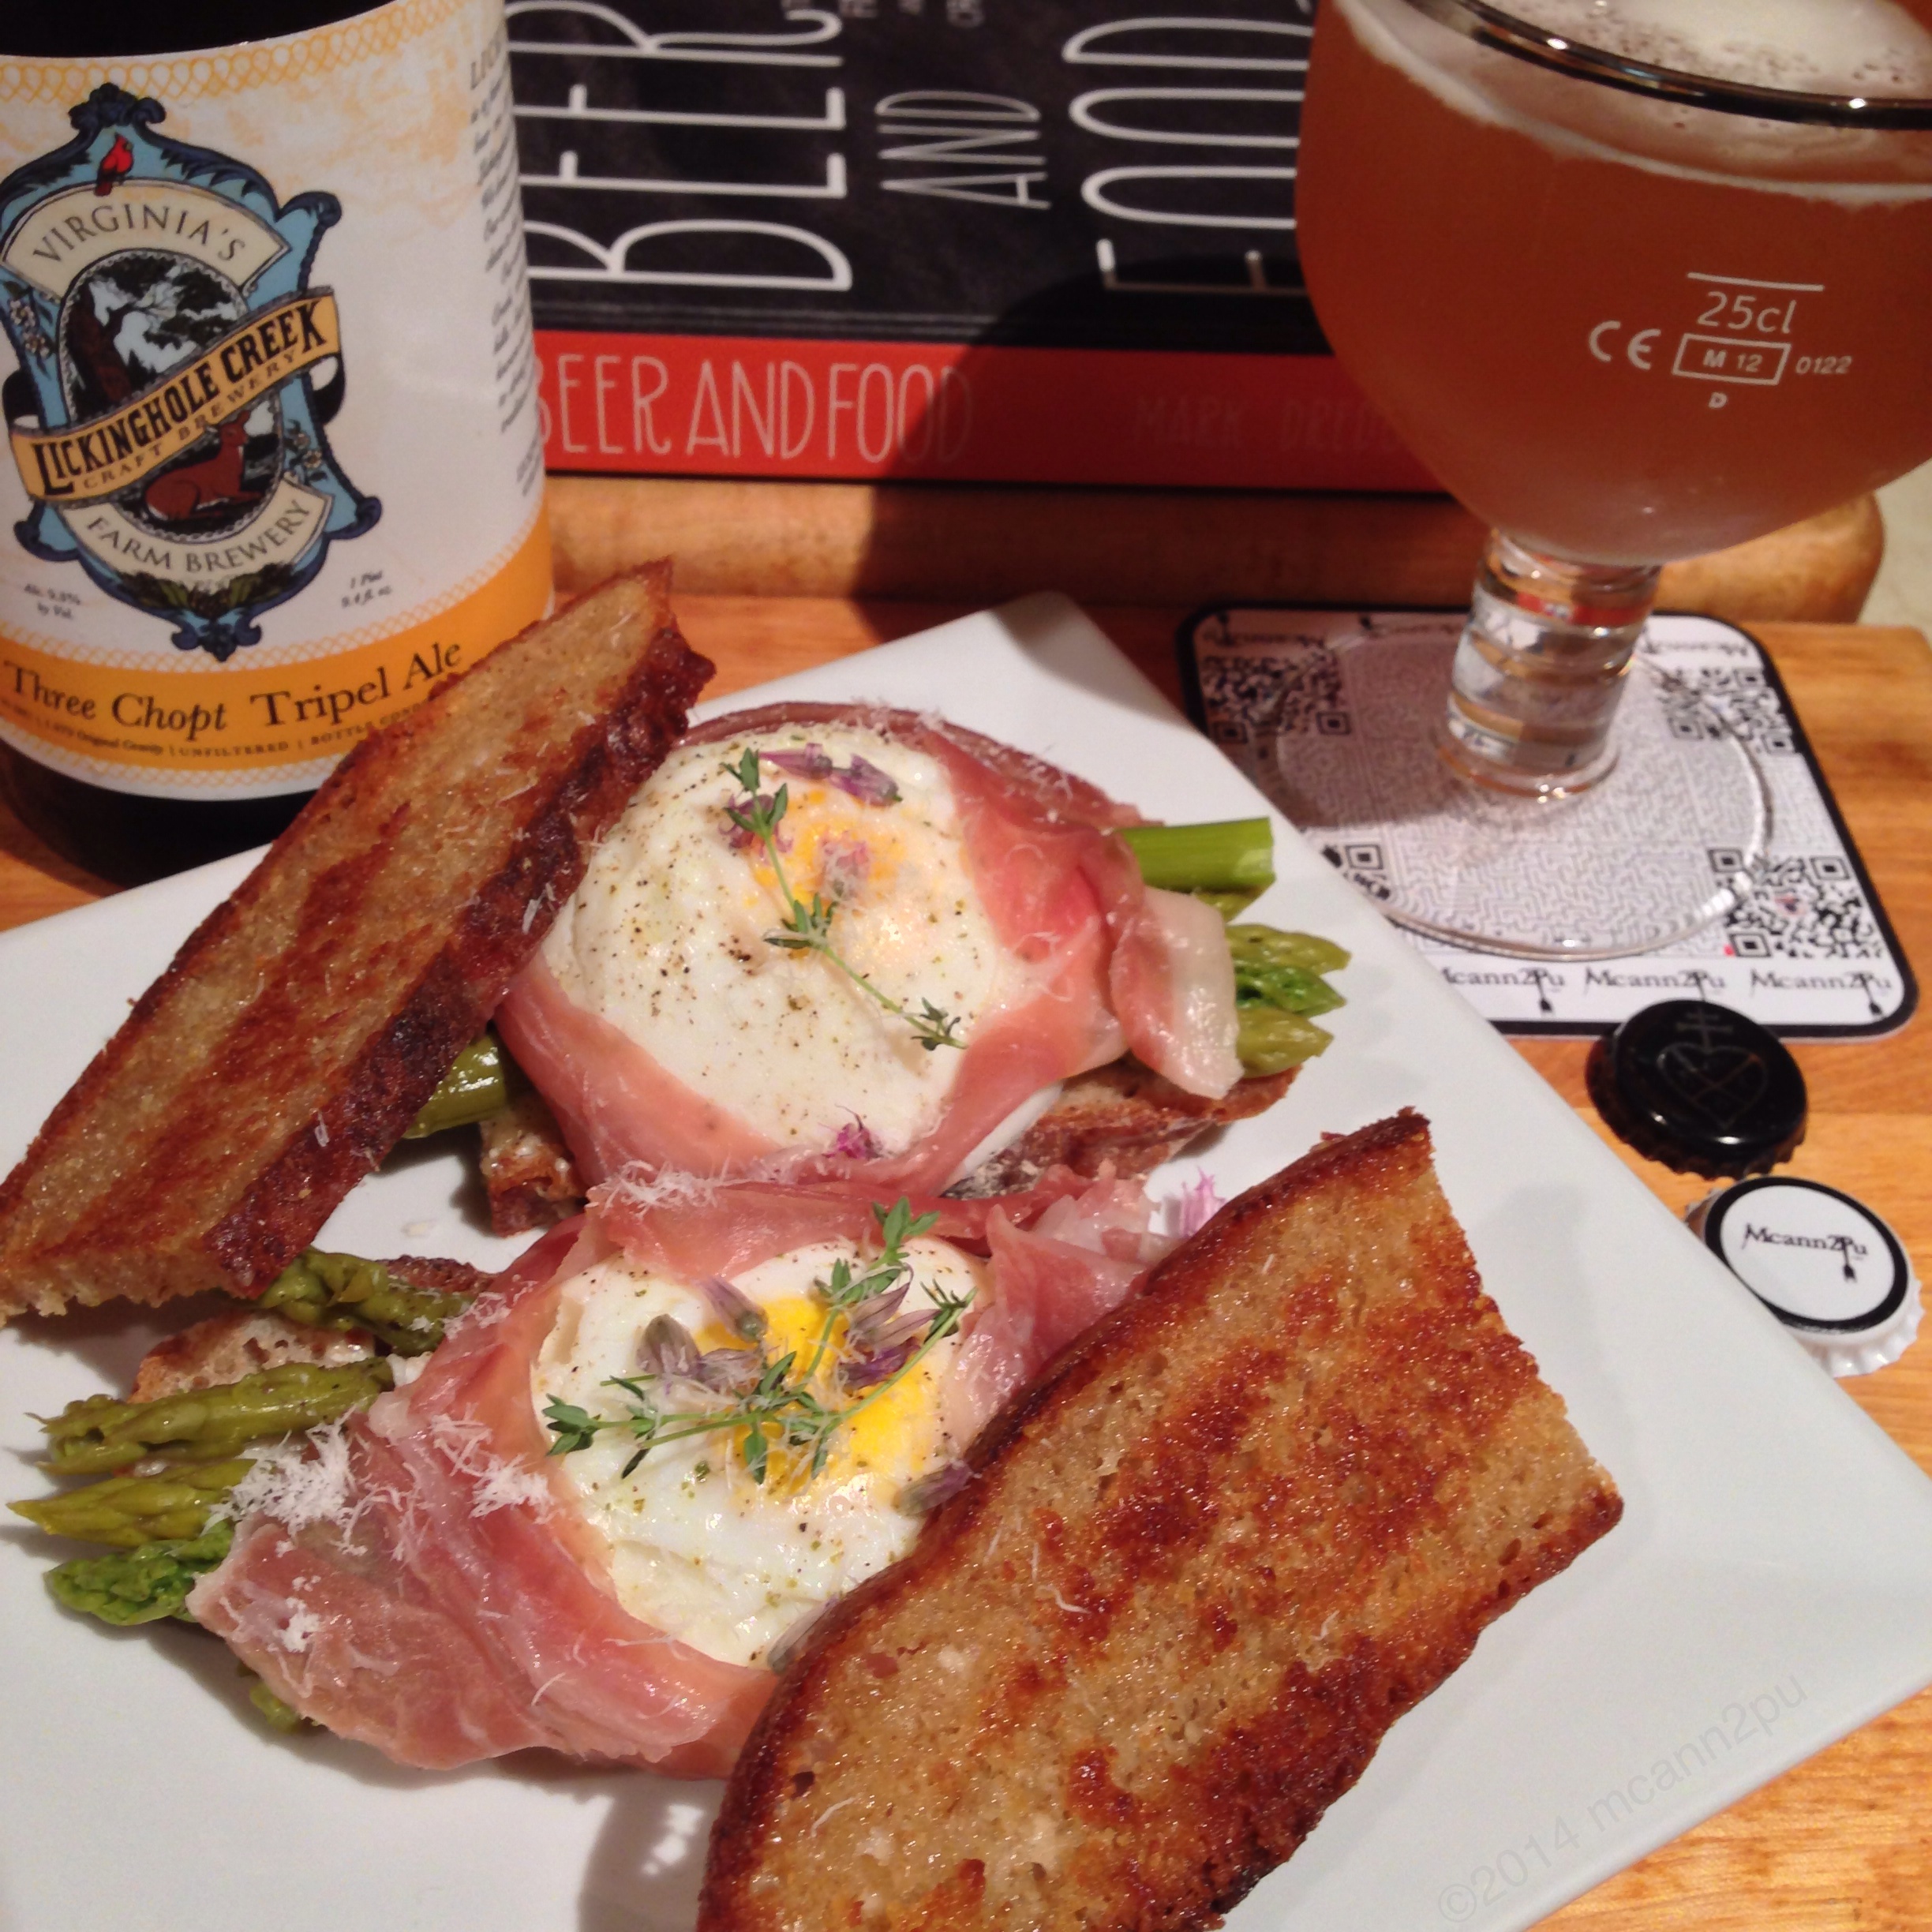 Asparagus, Poached Egg, Prosciutto, and Fontina Cheese Sandwich